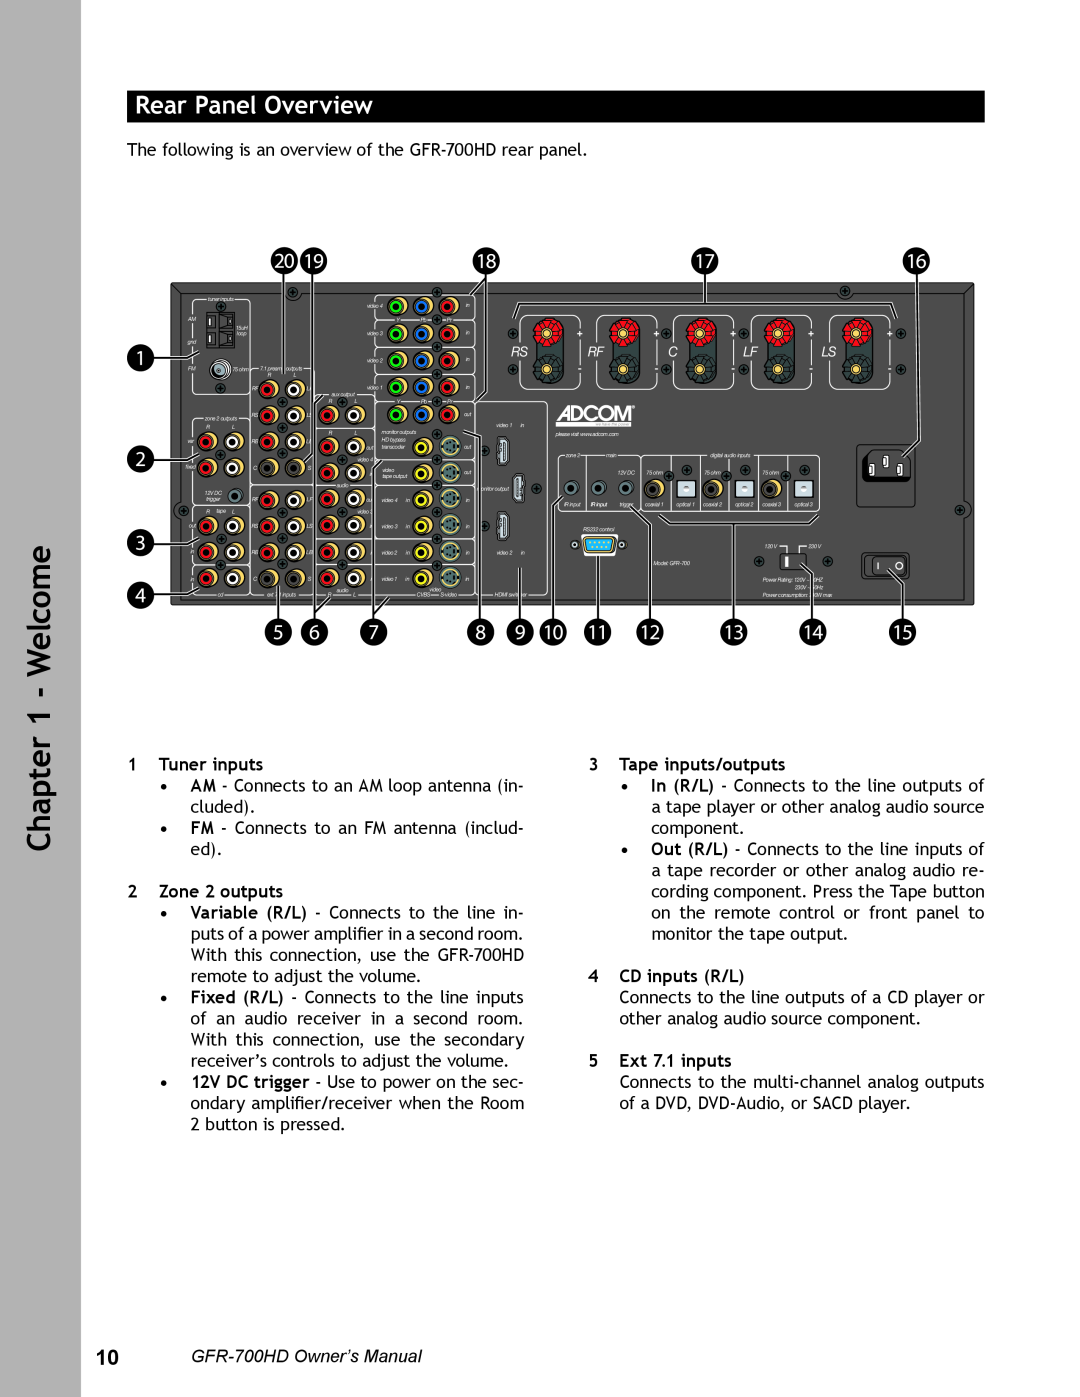 Adcom GFR-700HD user manual Welcome, Chapter, Rear Panel Overview, 1Tuner inputs, 2Zone 2 outputs, 3Tape inputs/outputs 